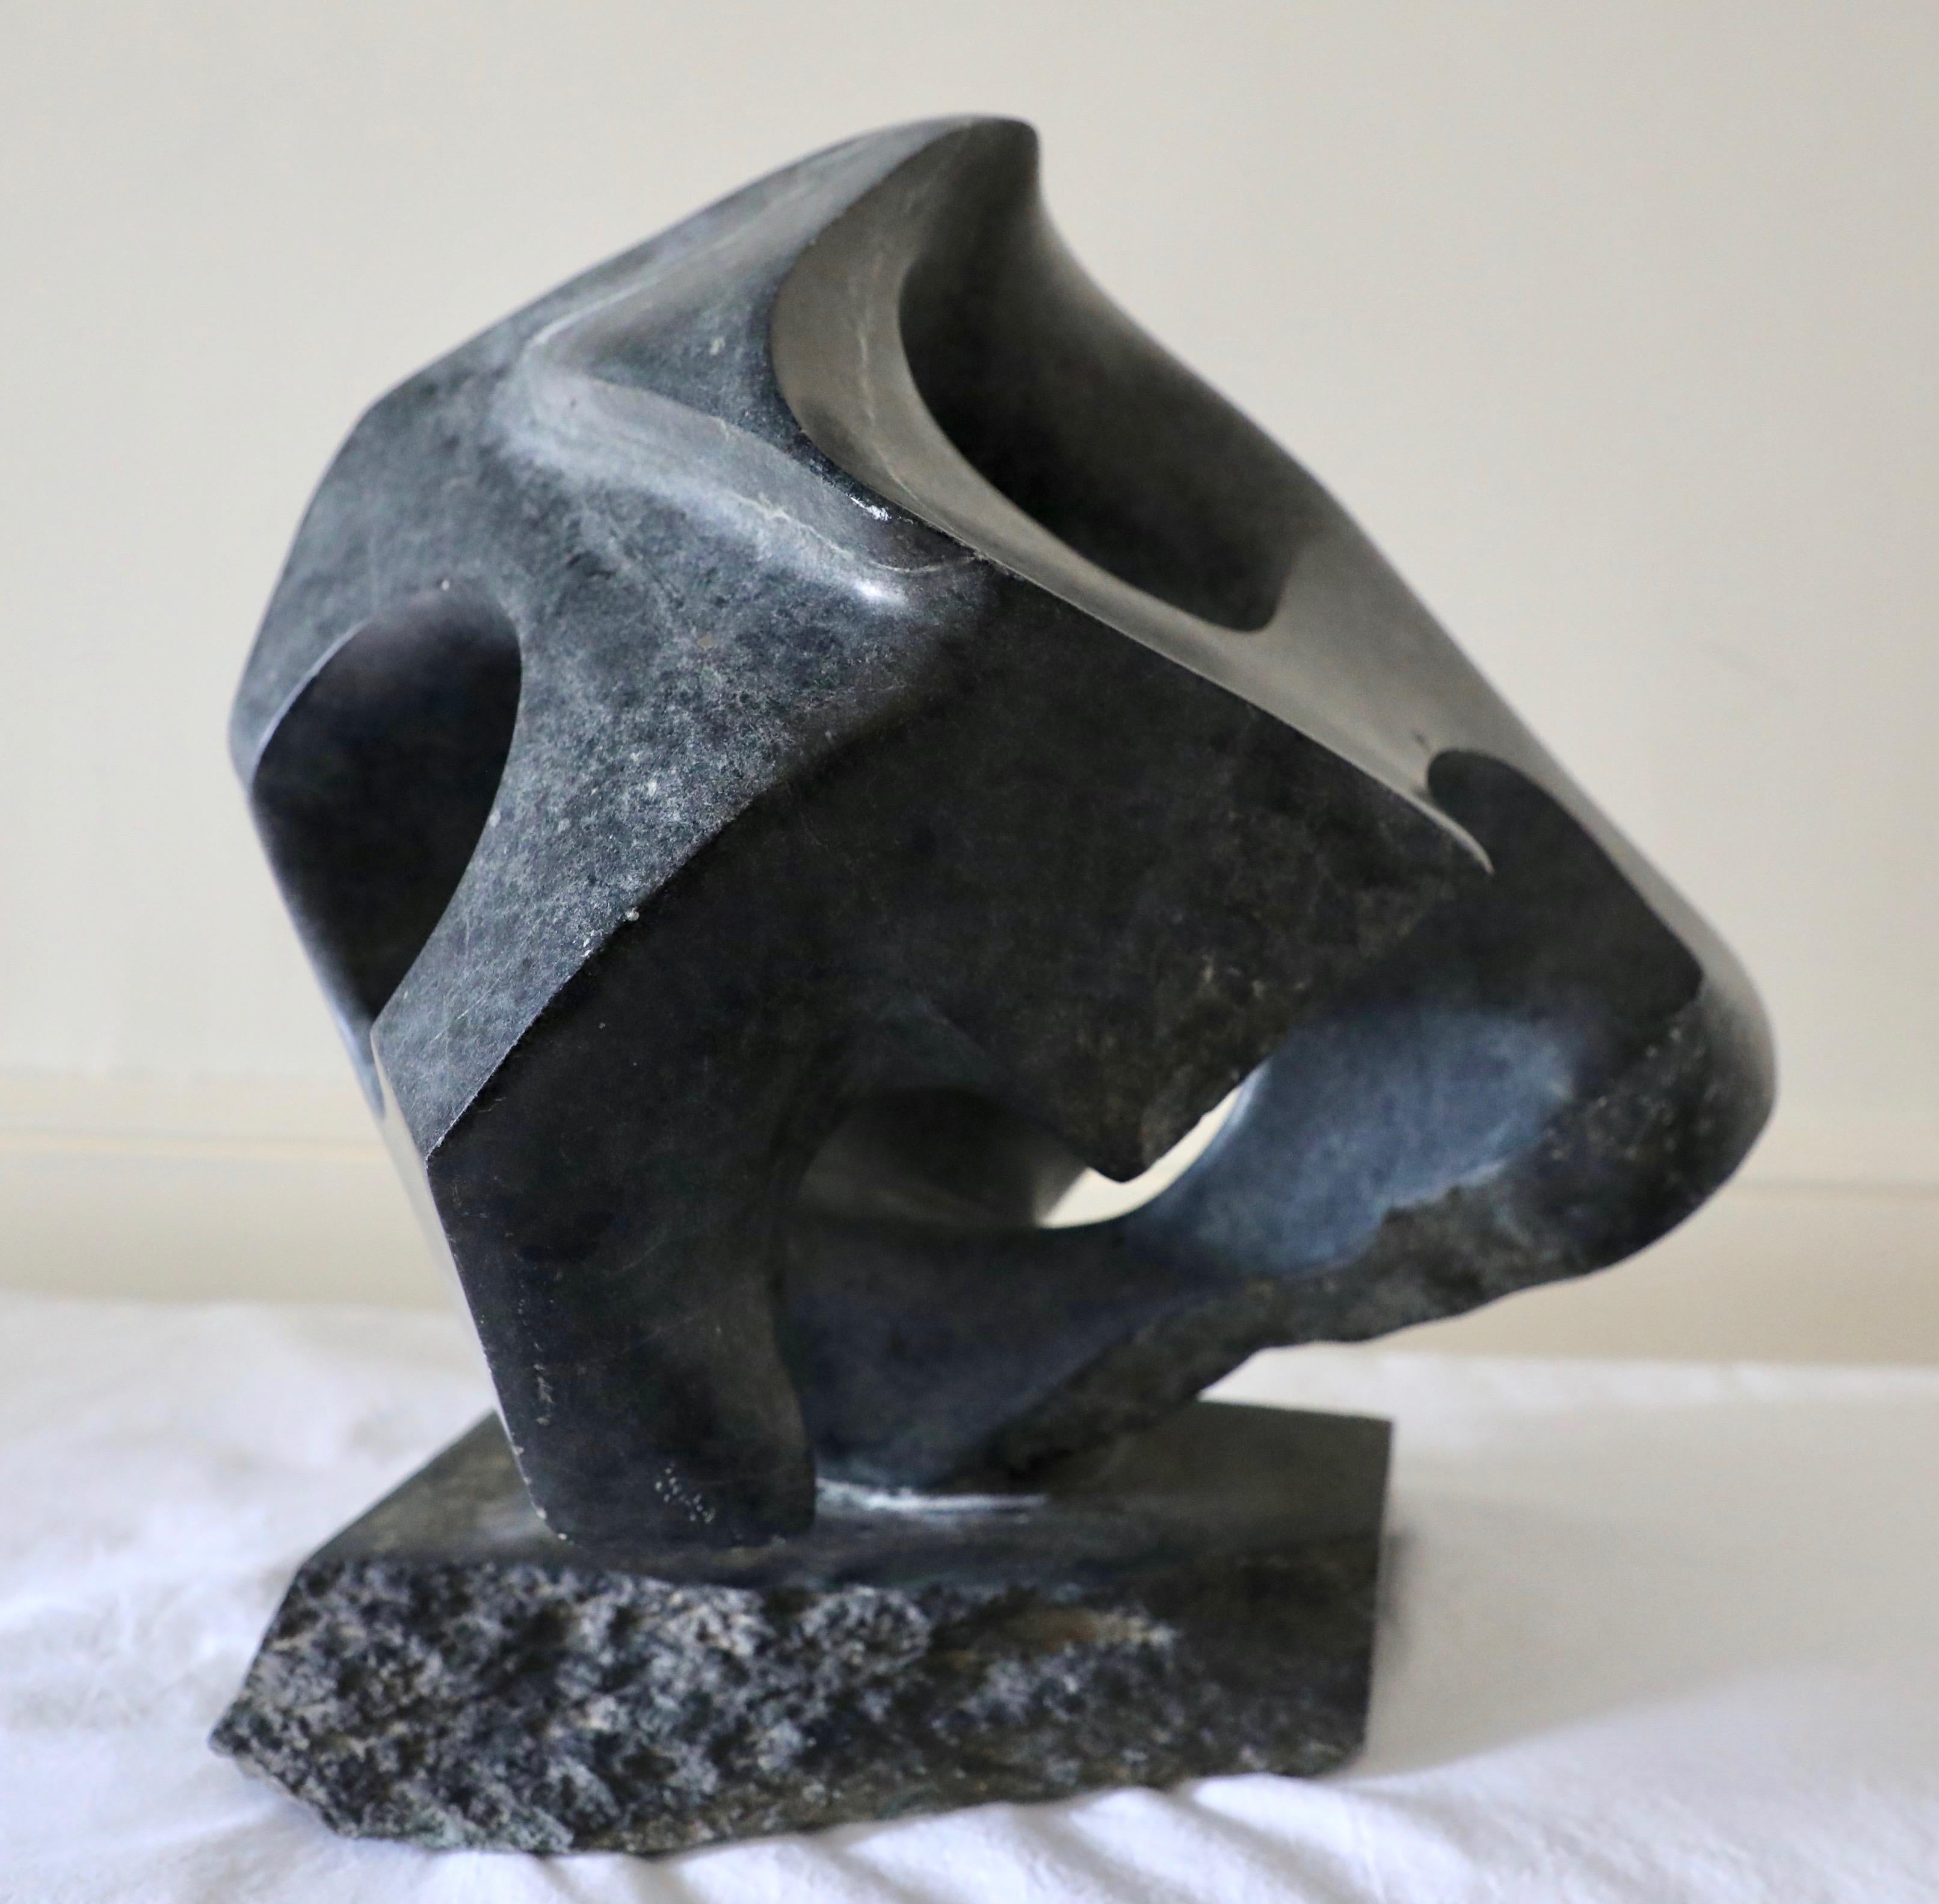 This is a large and bold sculpture carved from Virginia soapstone by Virginia sculptor David Breeden.  This piece can make quite an impact on a coffee table or in an entryway.  The work pivots and turns on its soapstone base.  

American sculptor